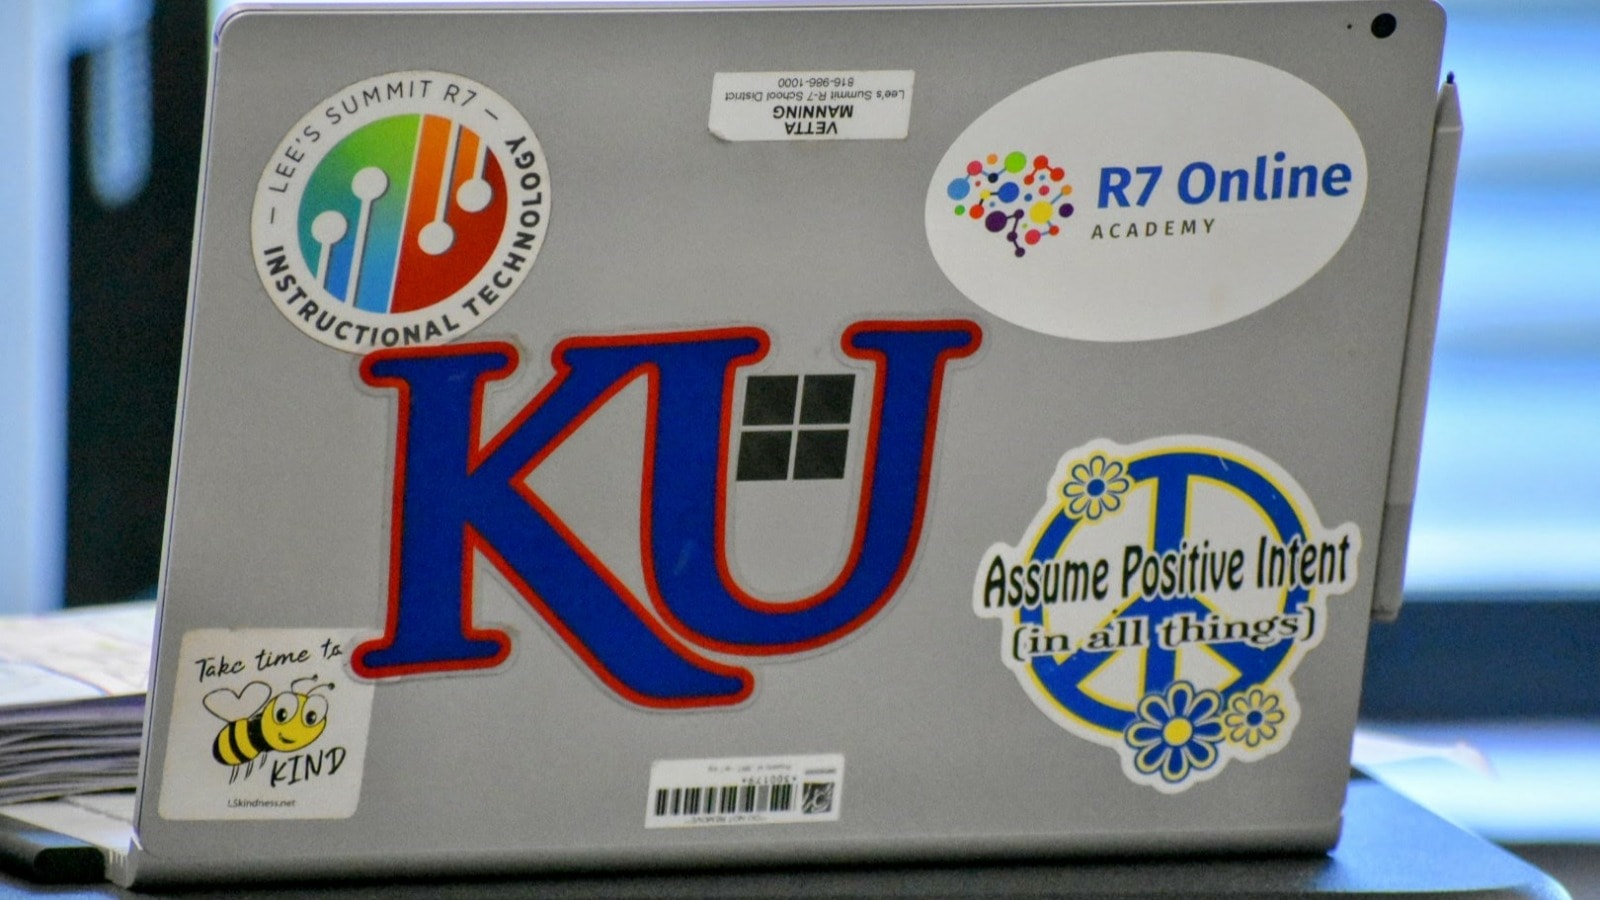 Lee's Summit school district has been on the leading edge of using technology in classrooms, as can be seen by these stickers on Vetta Manning's laptop.